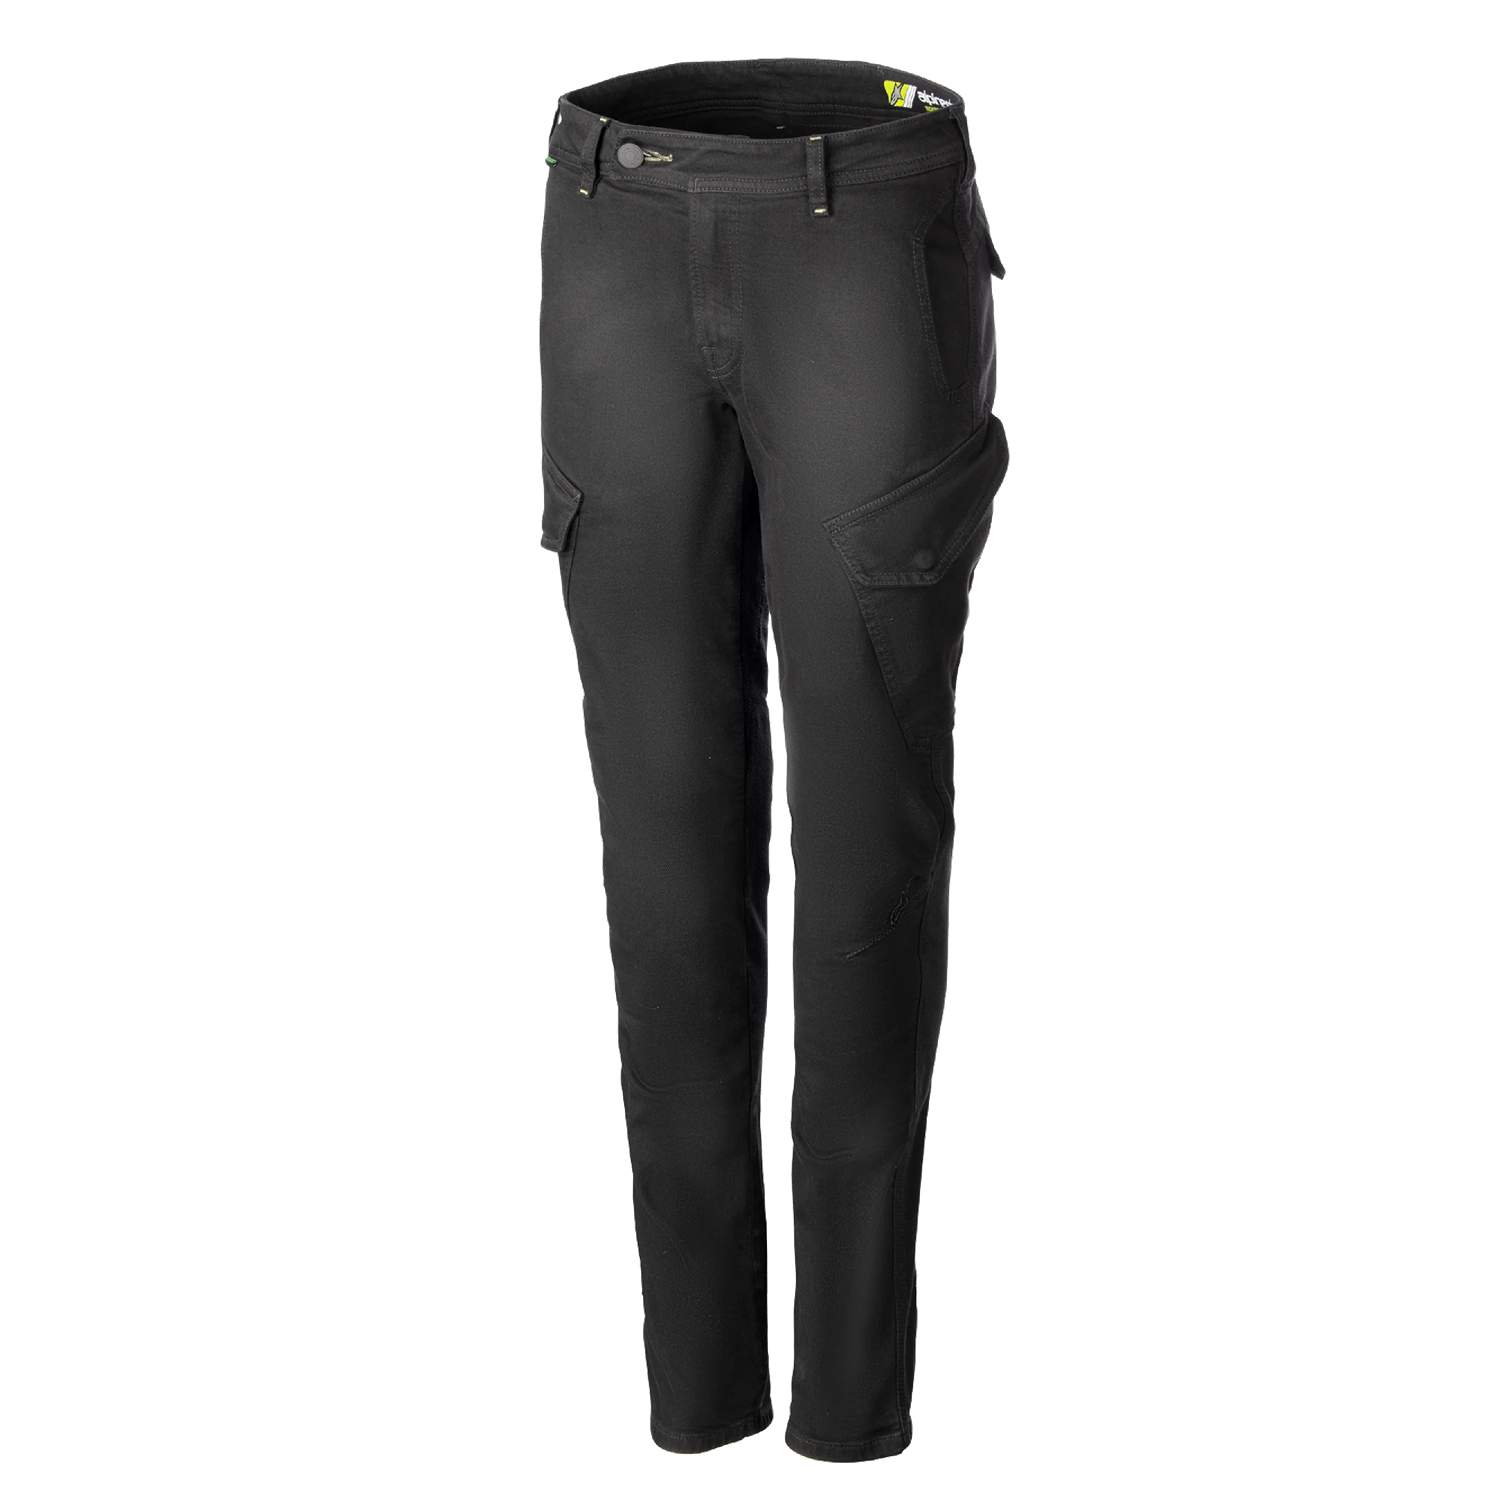 Image of Alpinestars Caliber Women's Tech Riding Pants Anthracite Taille 26